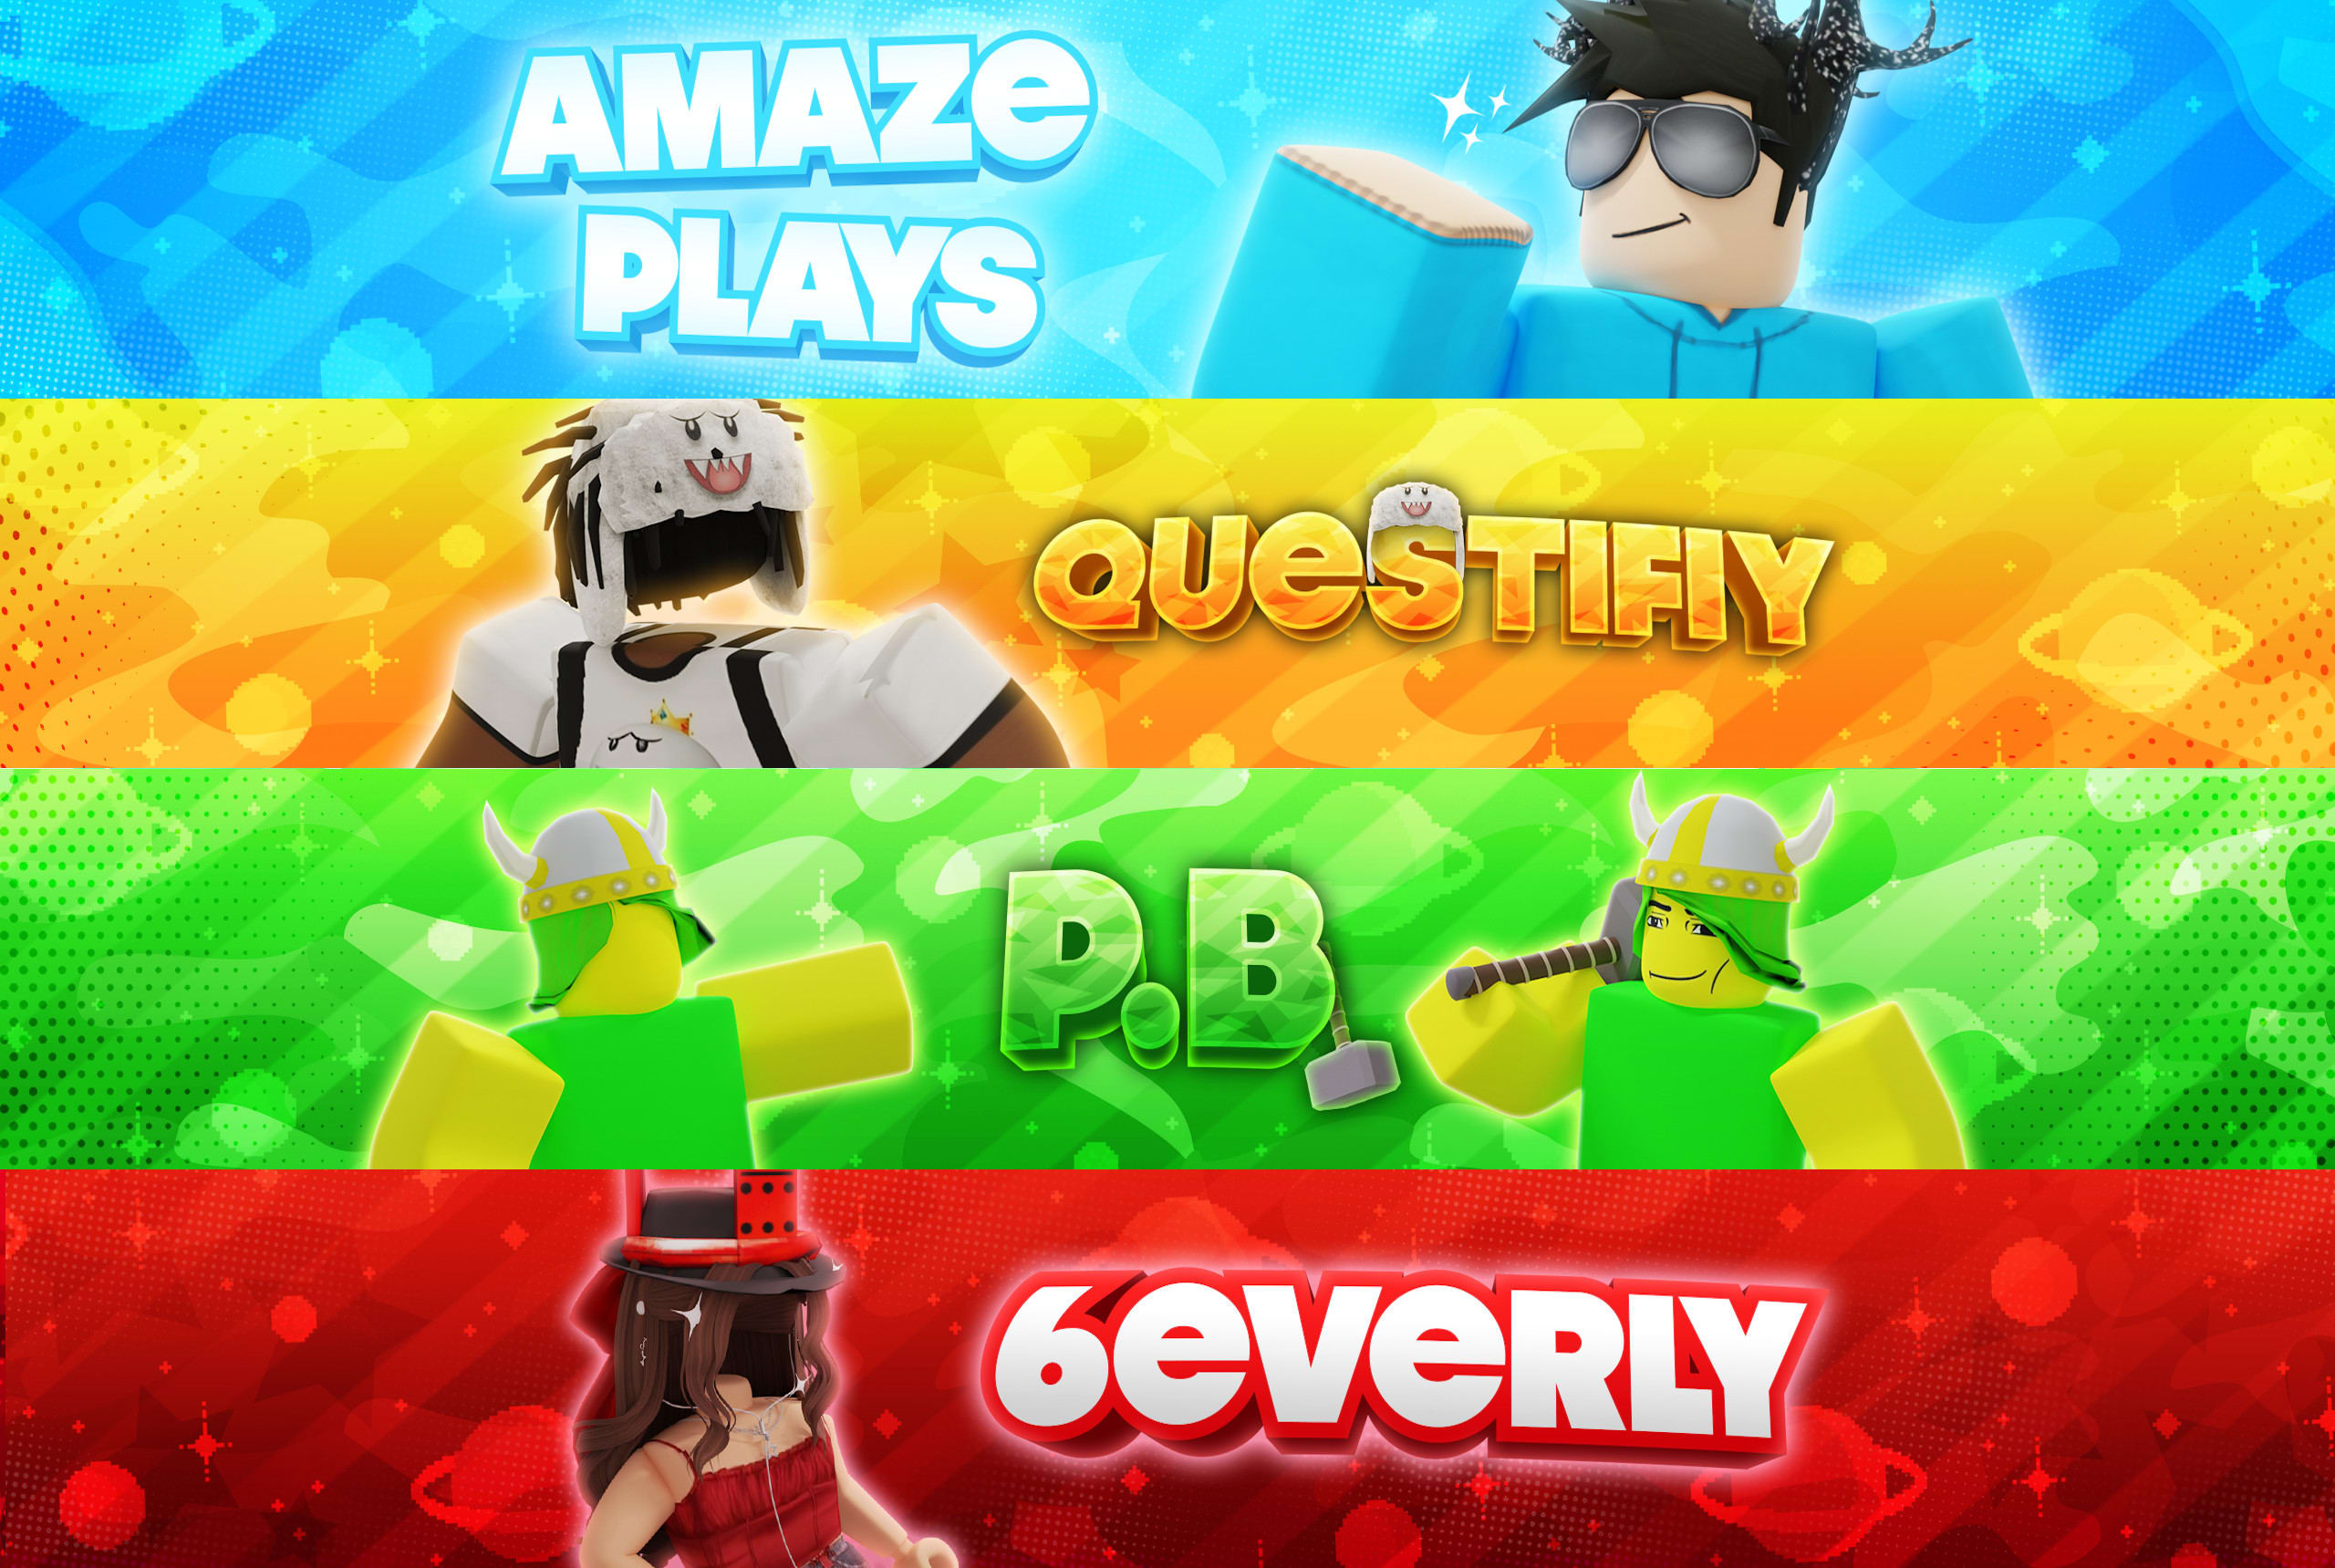 Roblox character renders starting at 10 robux each! - Portfolios